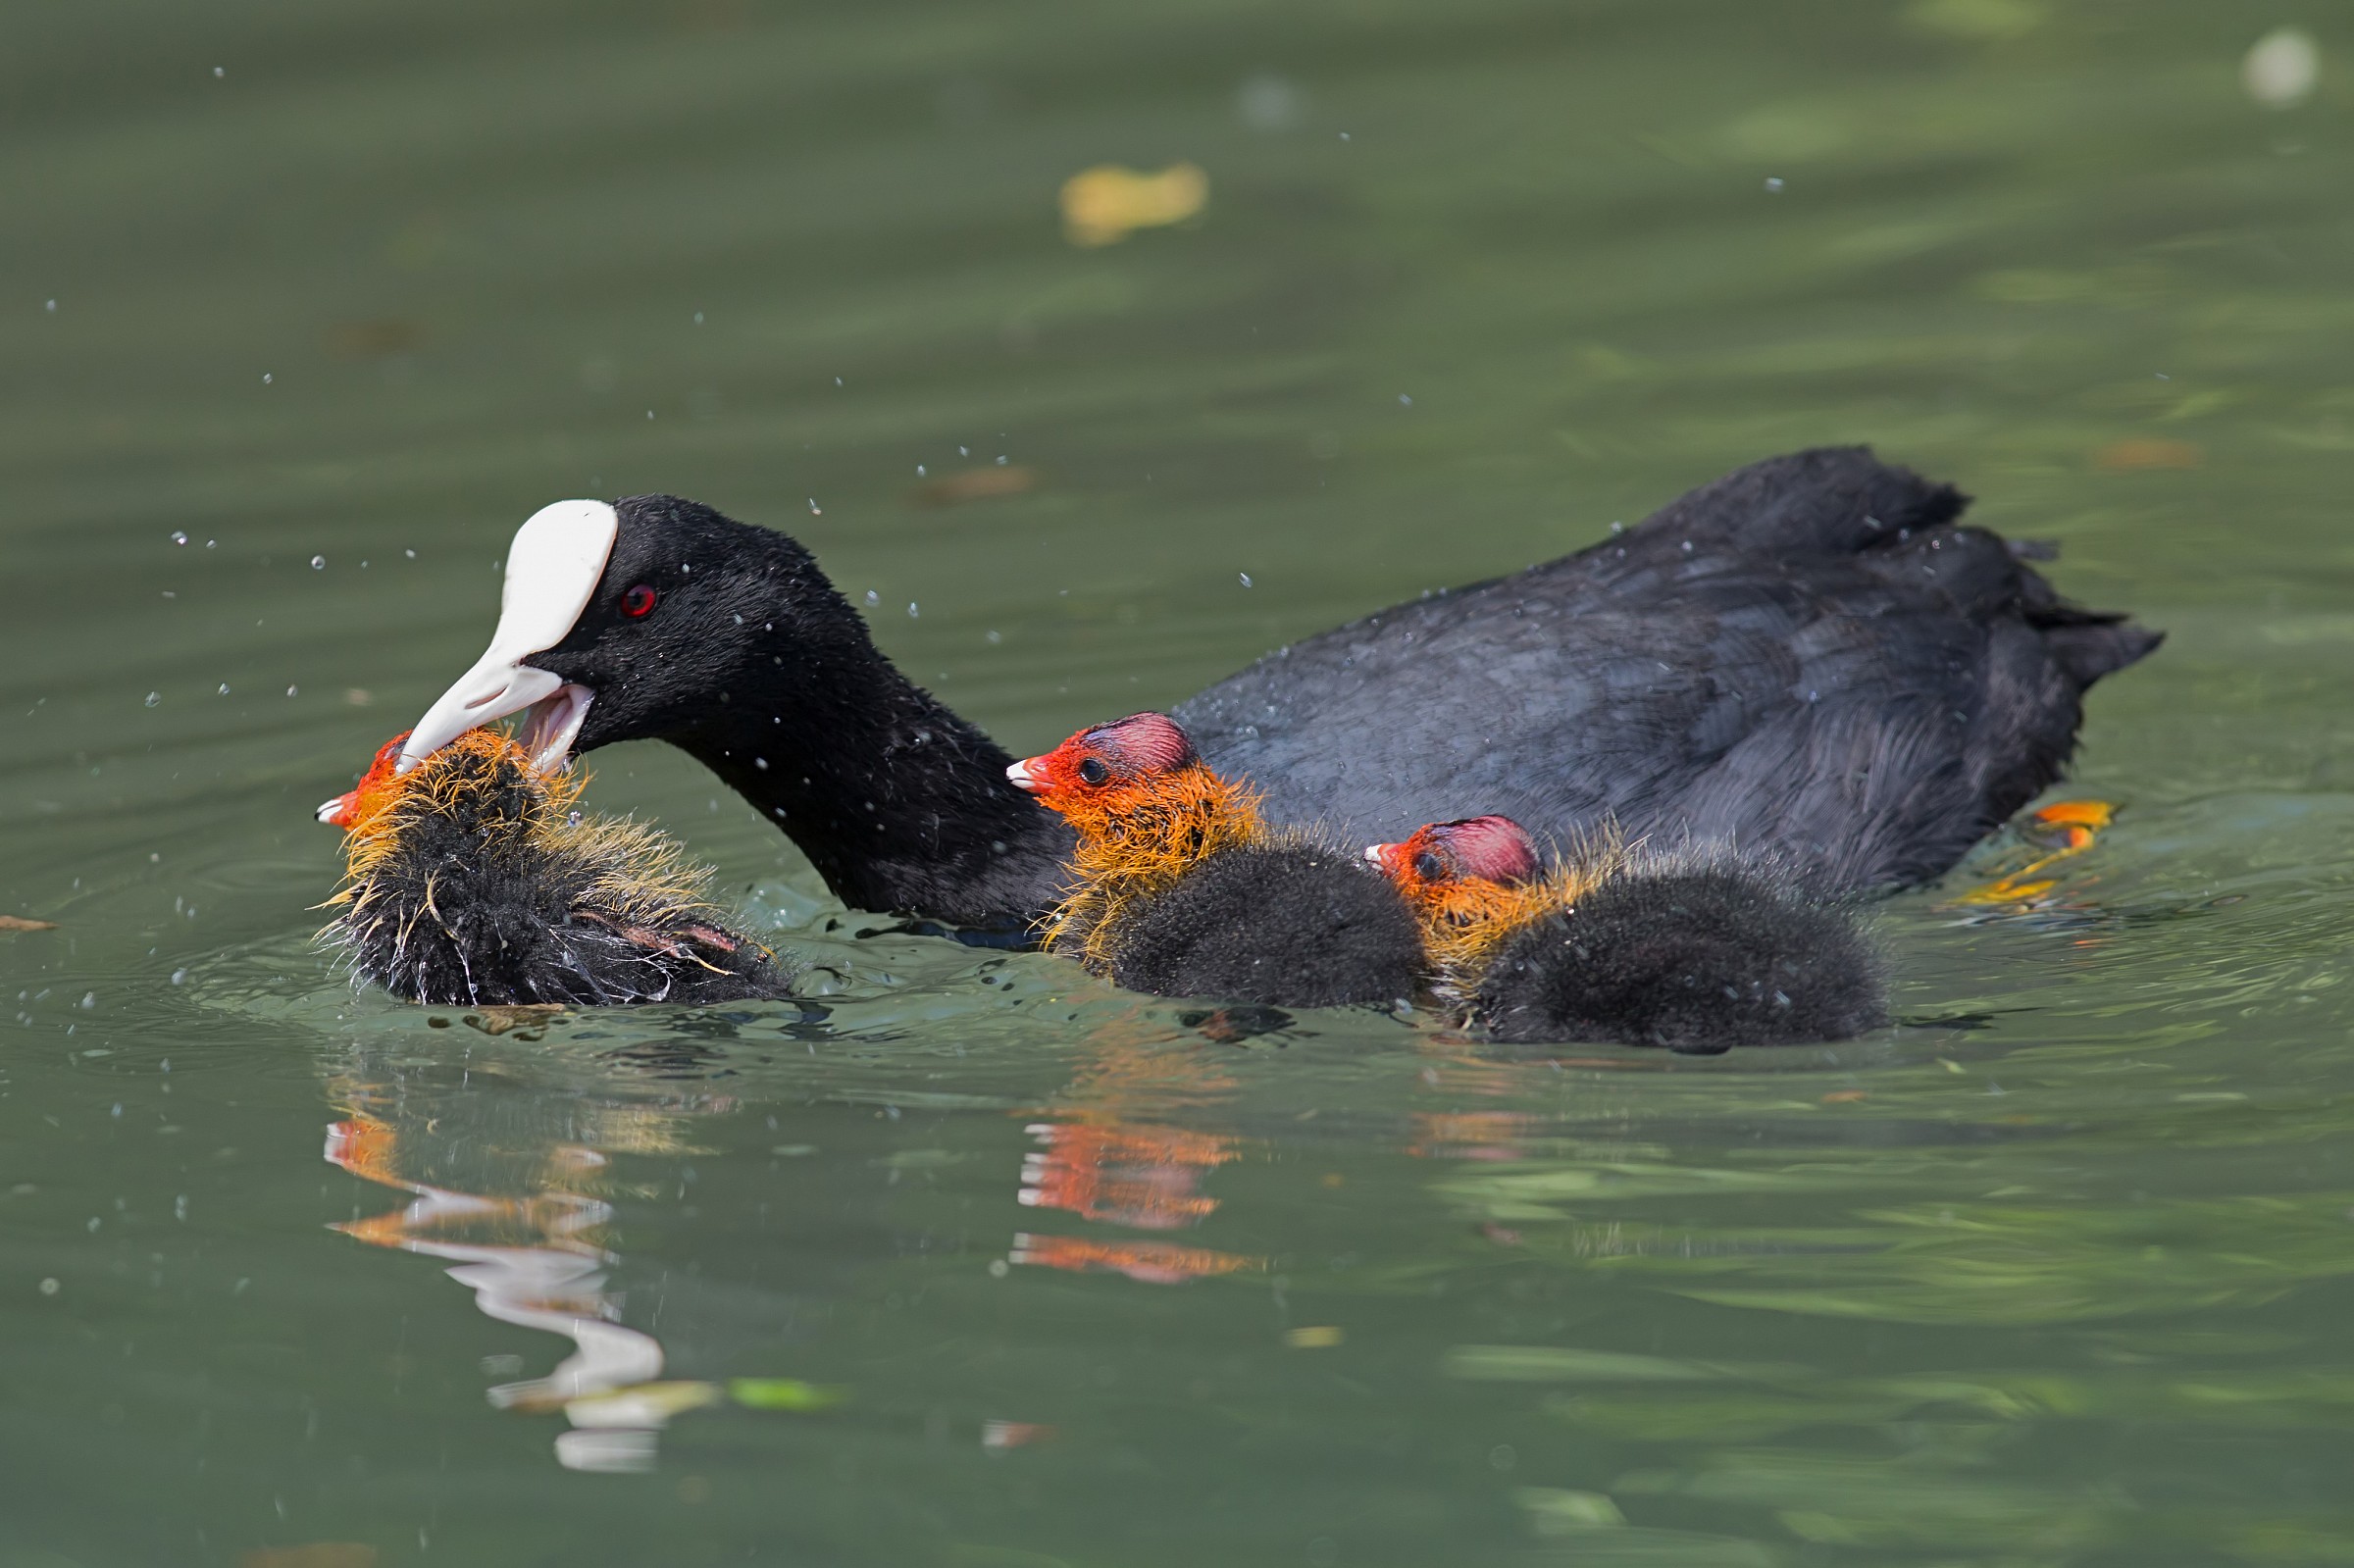 The scolding mother coot...